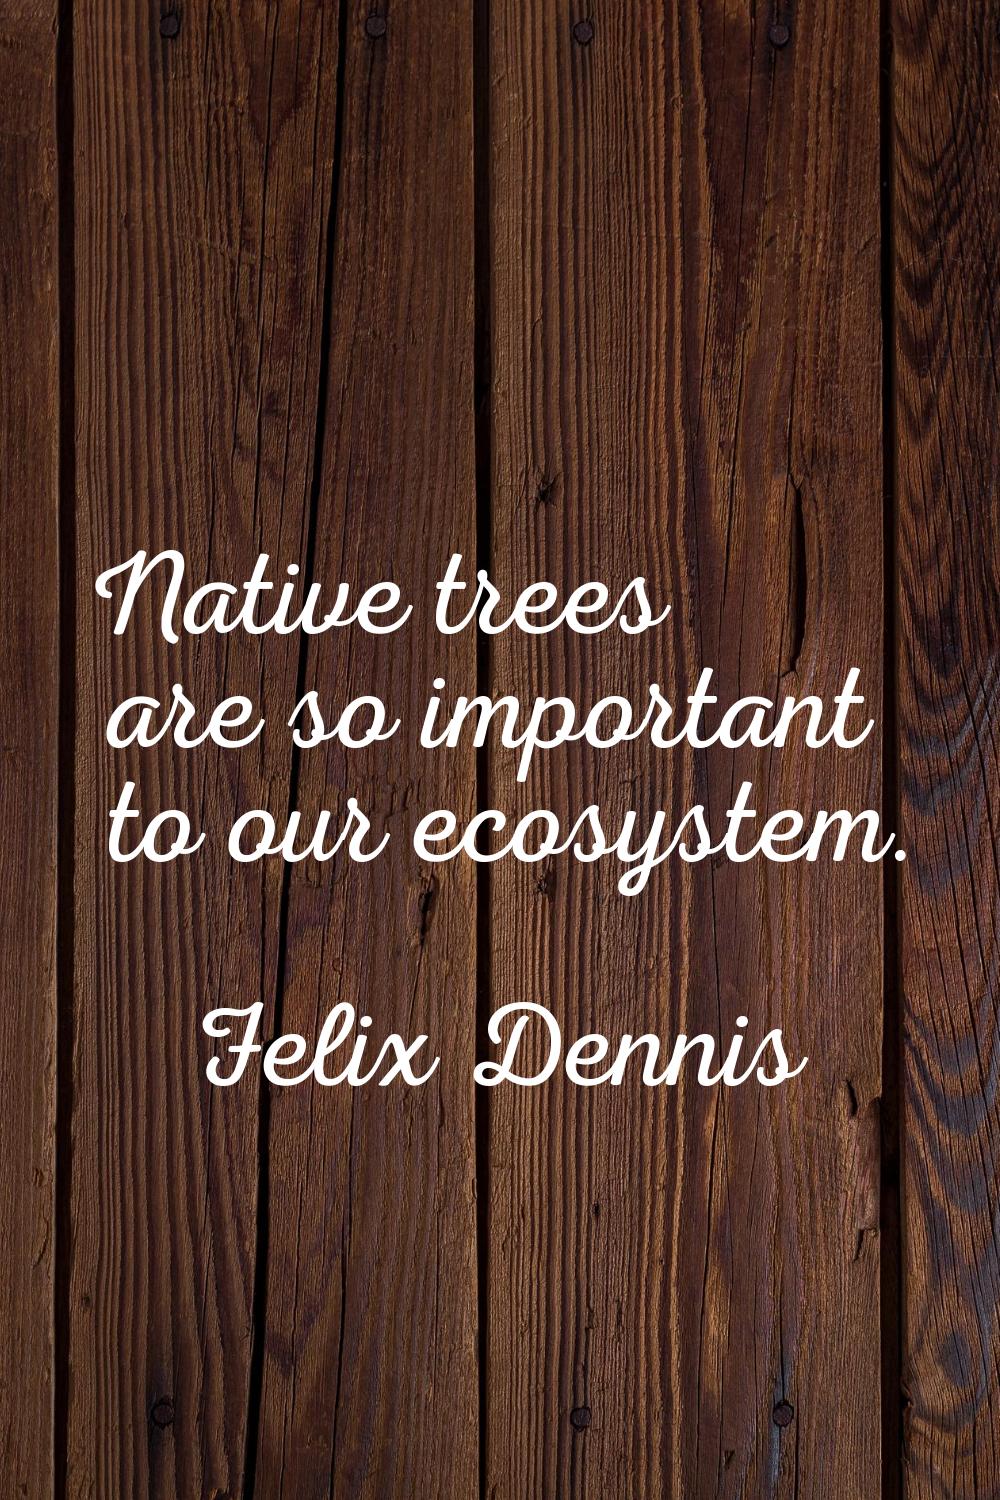 Native trees are so important to our ecosystem.